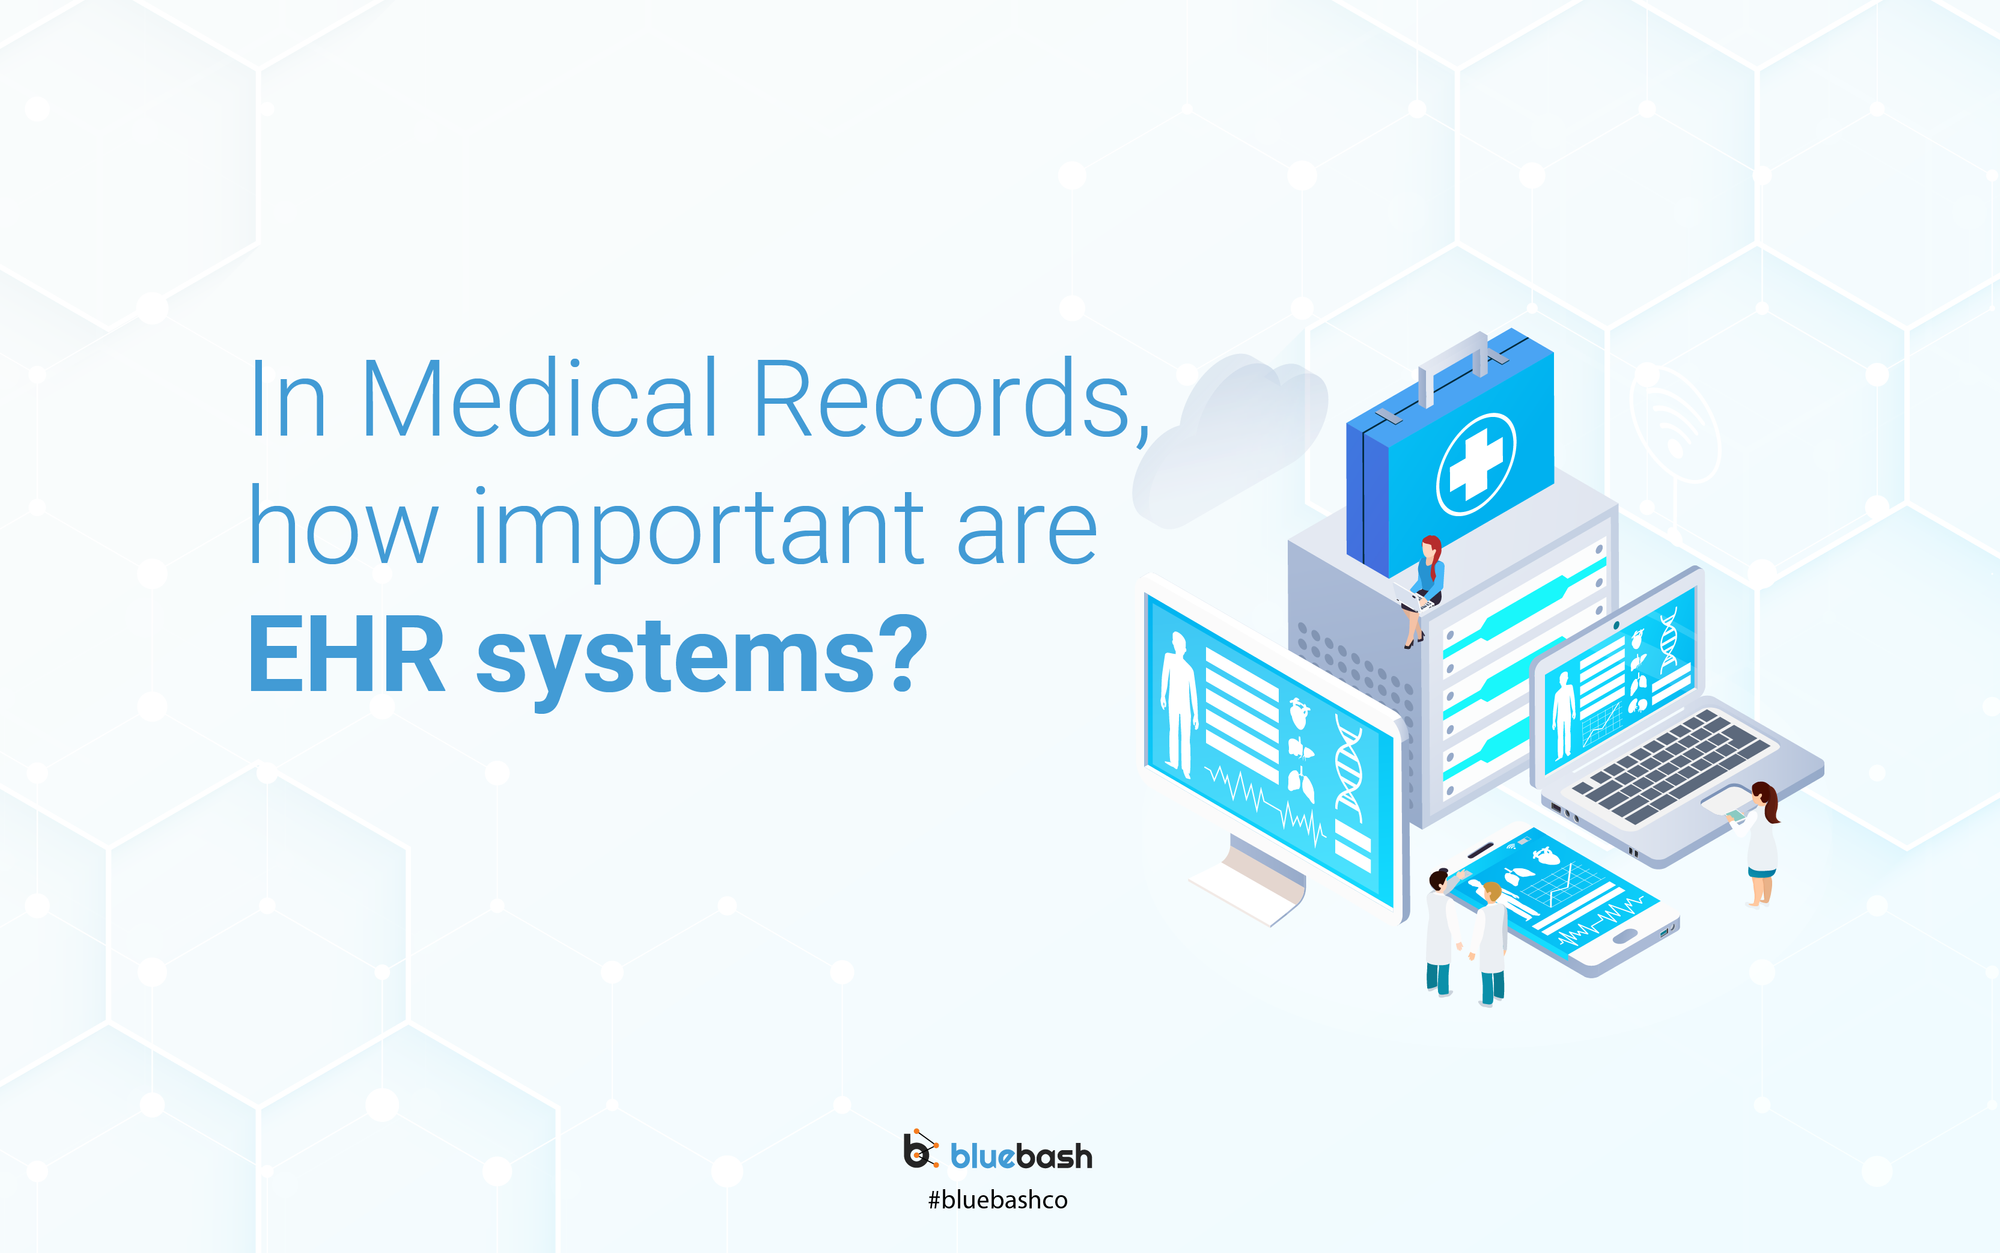 In medical records, how important are EHR systems?